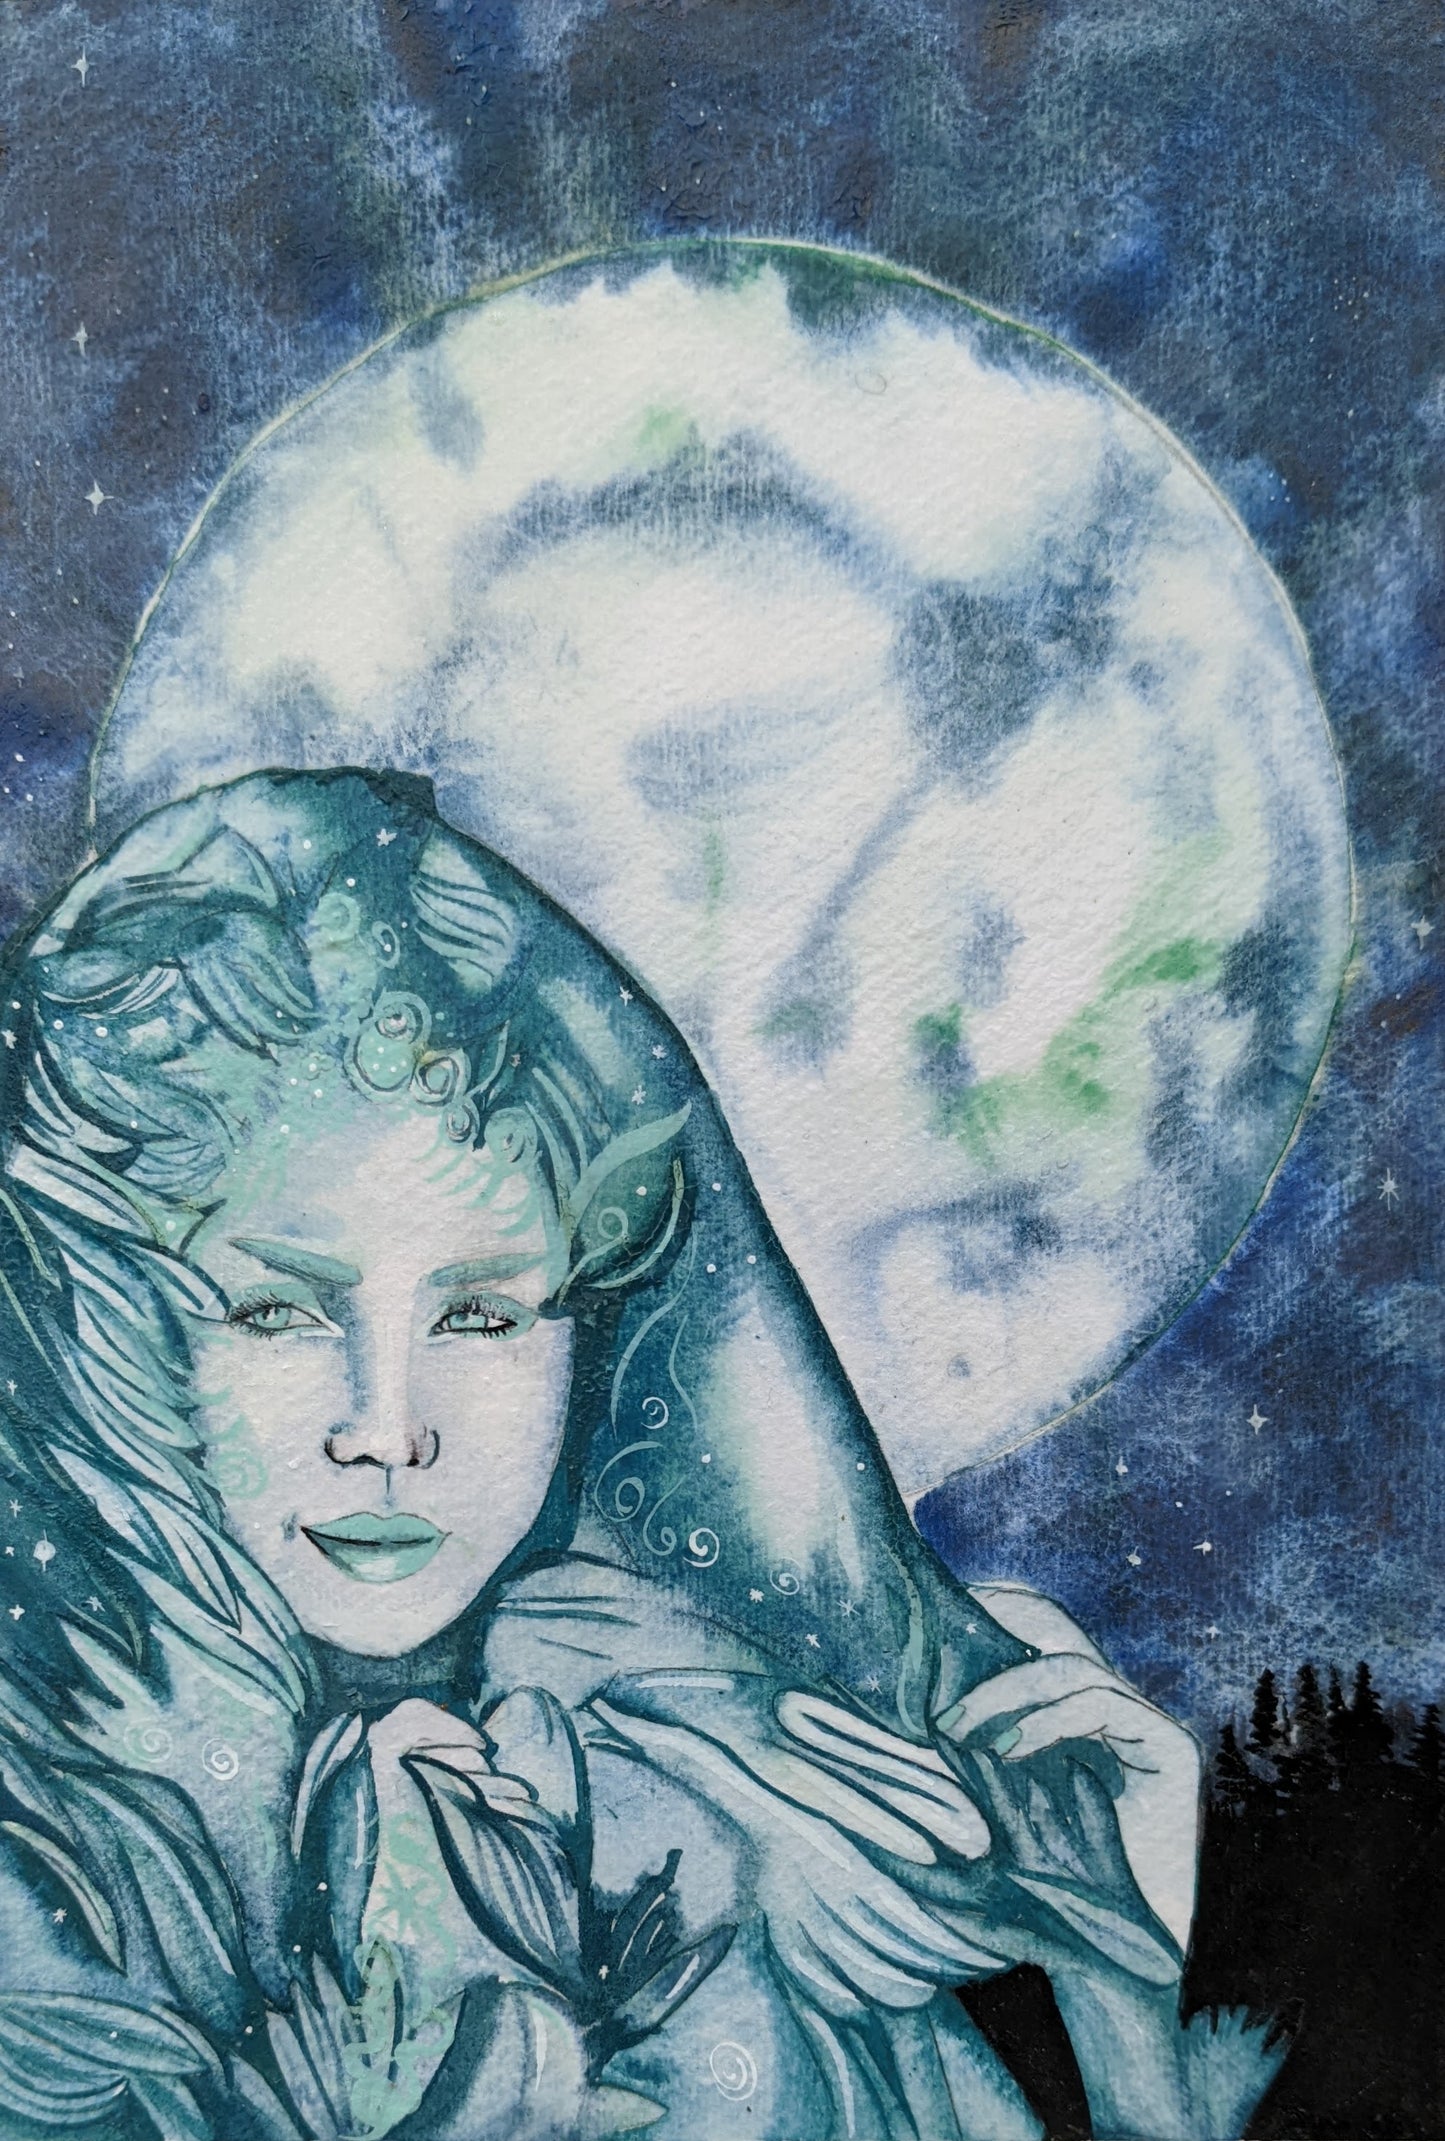 By Middlesbrough artist Dianne Bowell. The Snow Queen, an original painting based on the original story by hans christian anderson, and illustrative image with a full moon